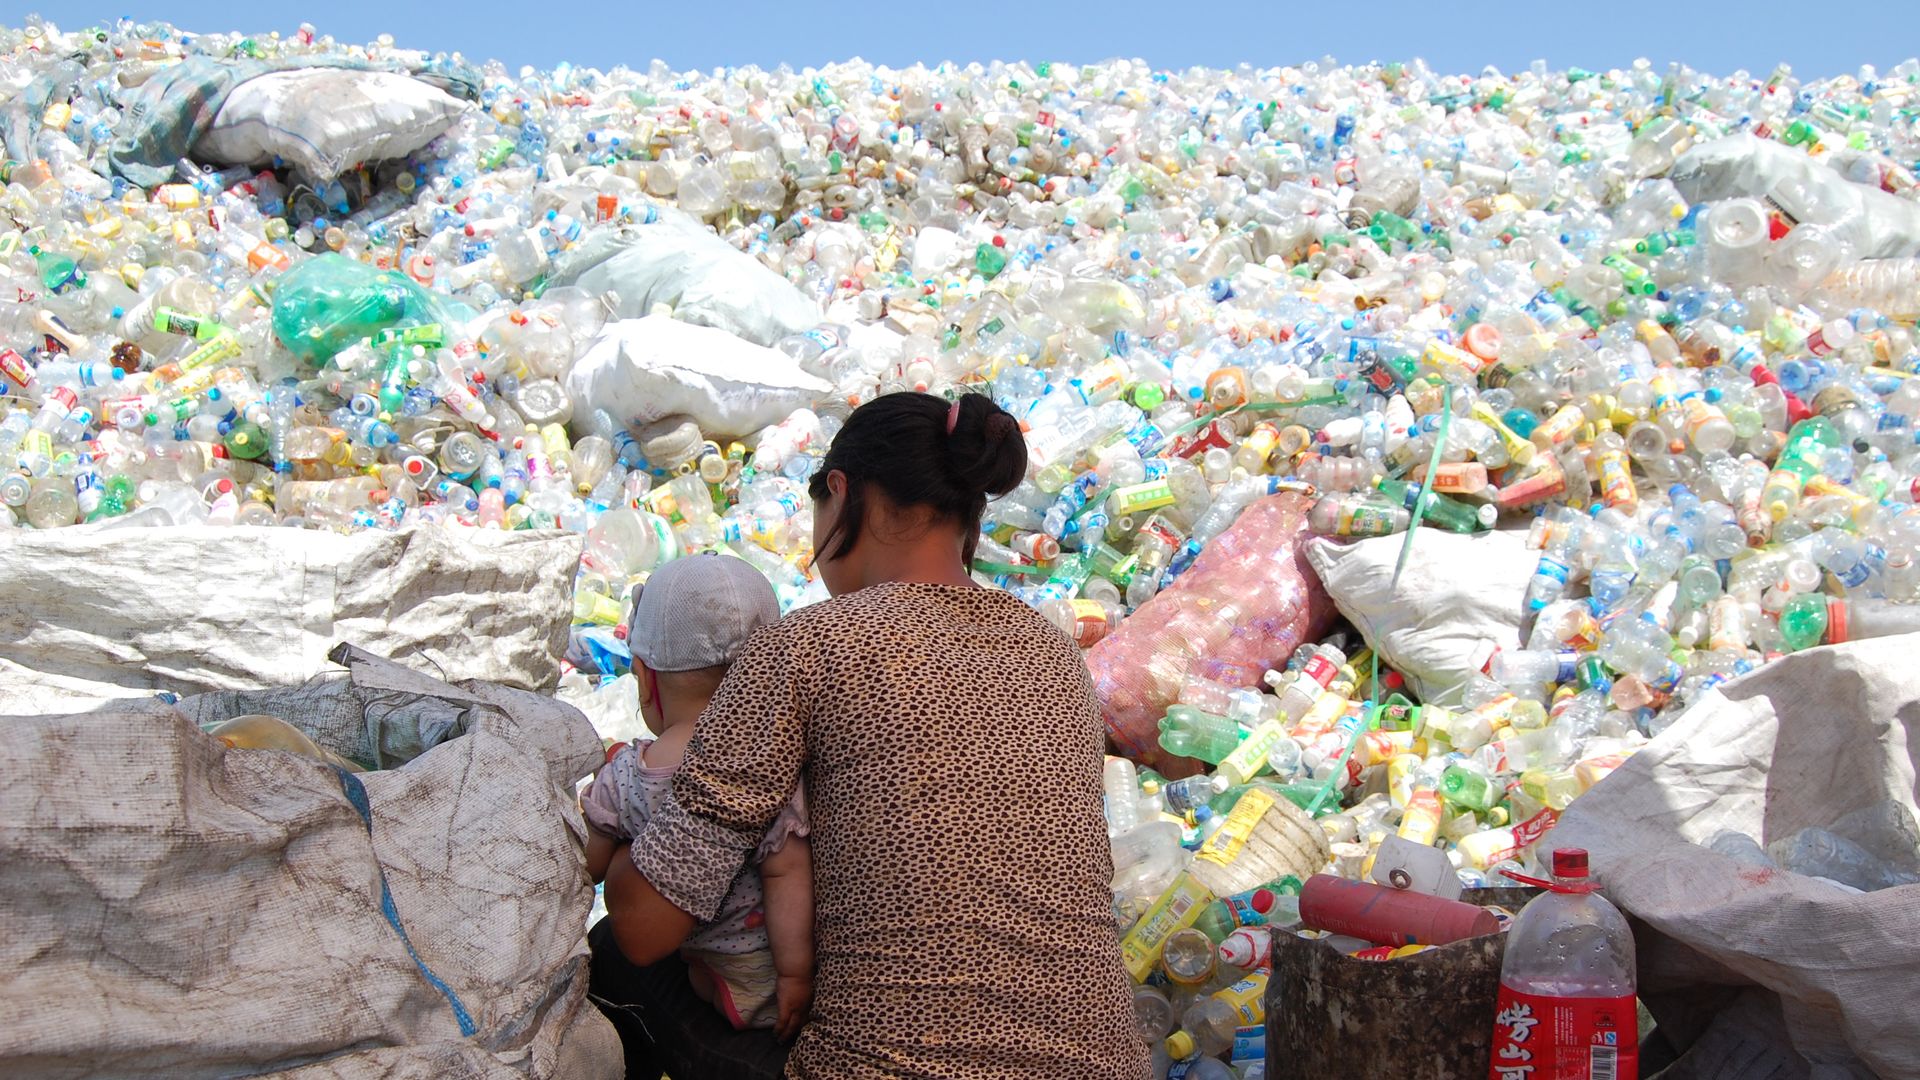 A woman sits with her baby in a sea of plastic bottles